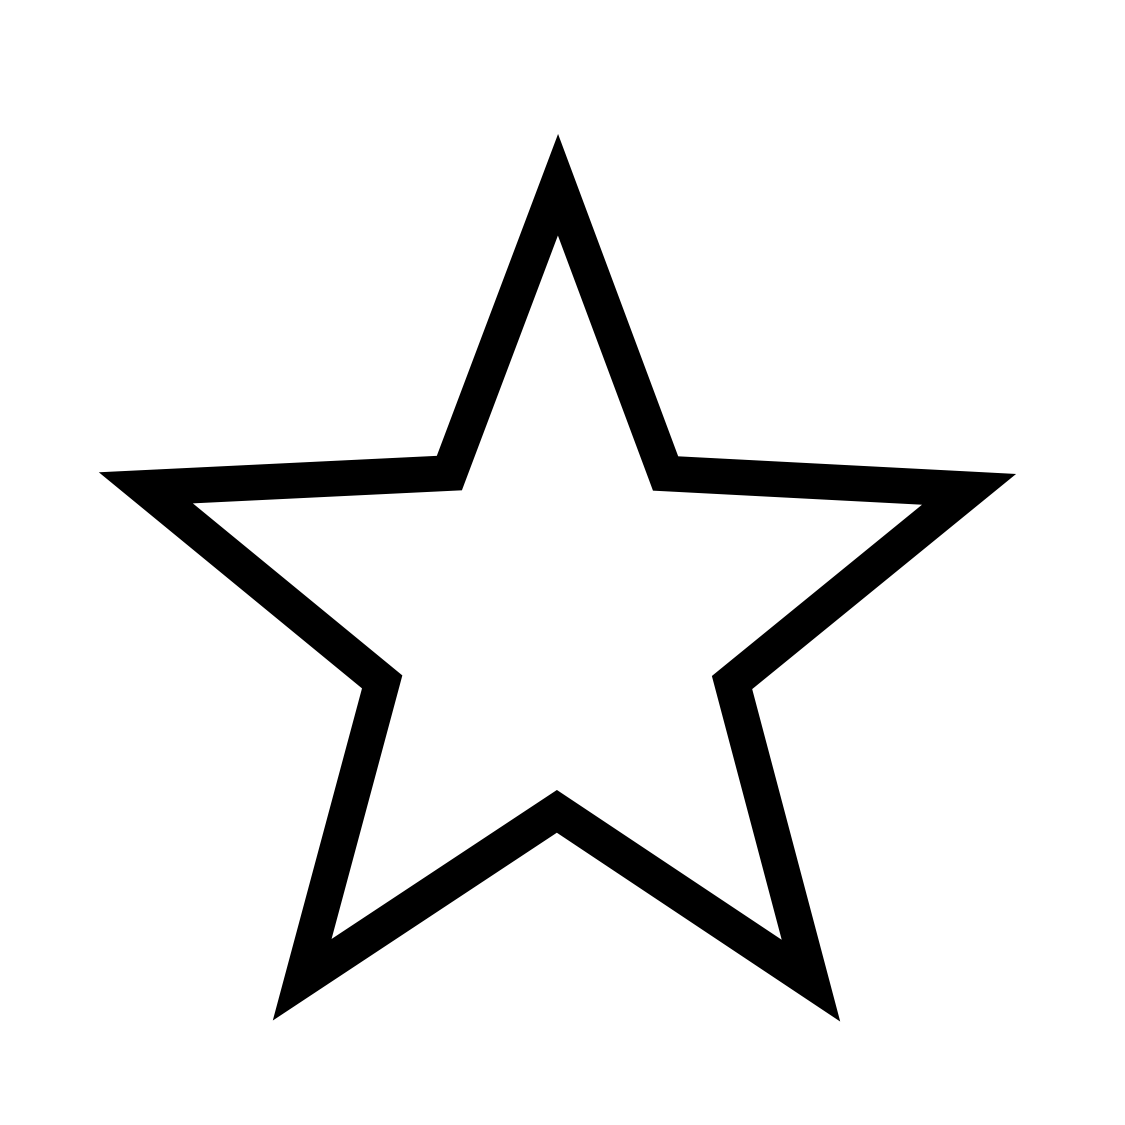 Star Black and White Logo - Stars PNG Images, free star clipart images - Free Icons and PNG ...